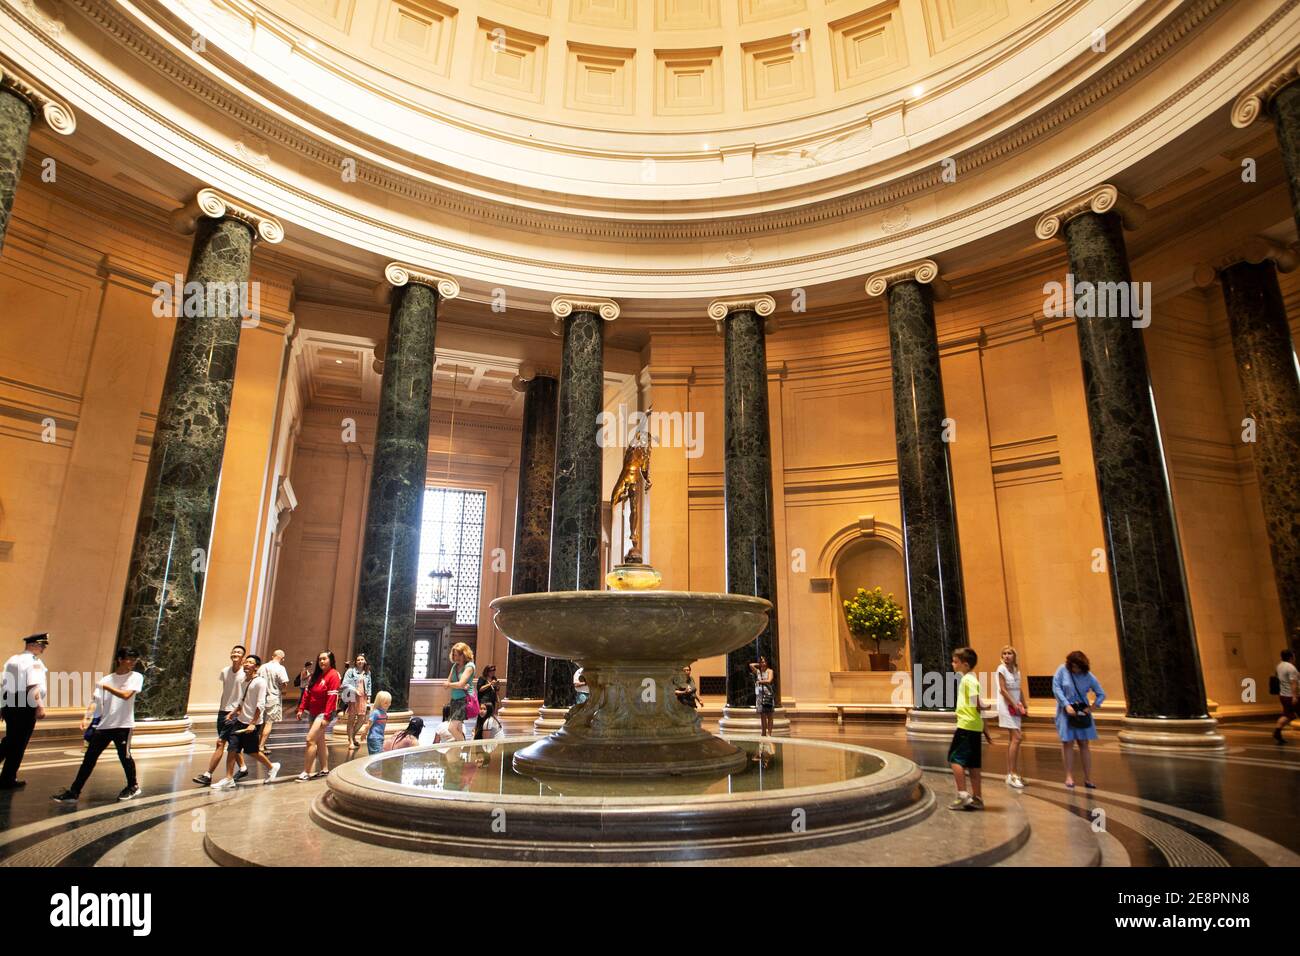 The Mercury Fountain in the Rotunda of the West Building of the National Gallery of Art in Washington, DC, USA. Stock Photo